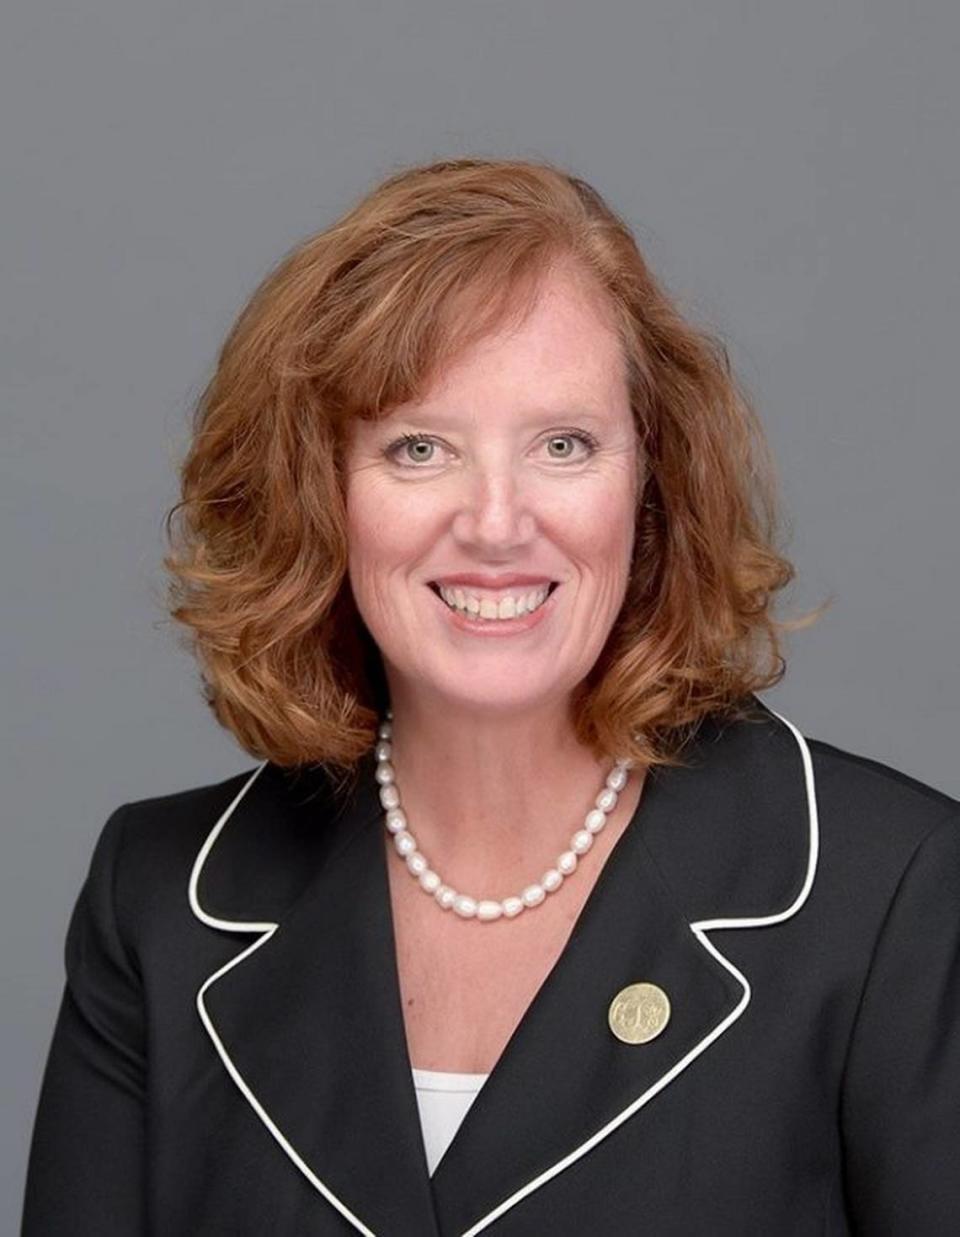 Cady Short-Thompson is the president of Northern Kentucky University.